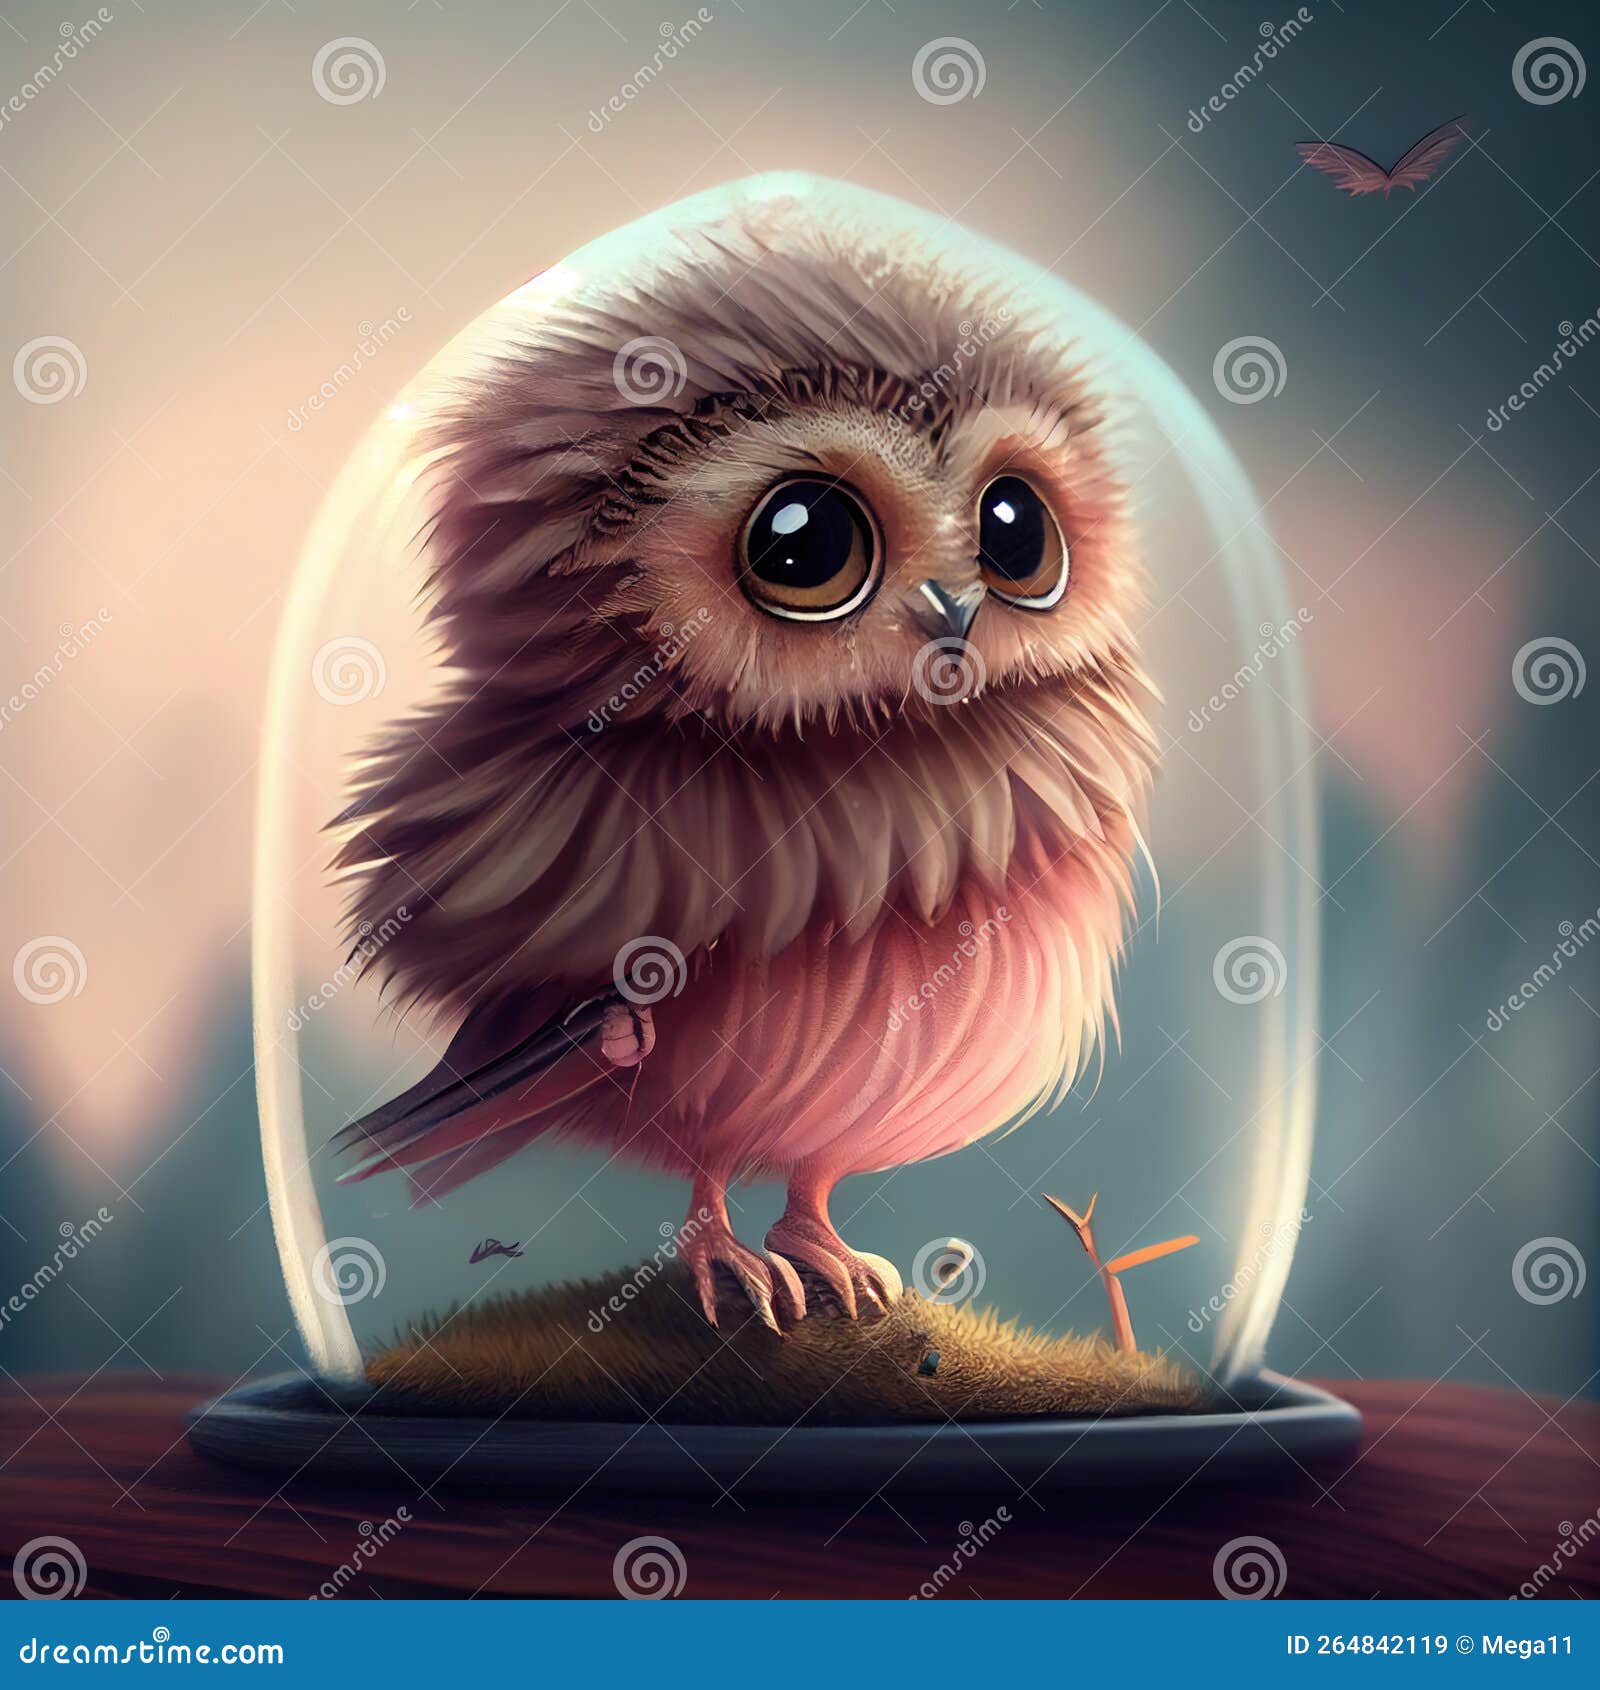 Cute Owl Pictures  Download Free Images on Unsplash